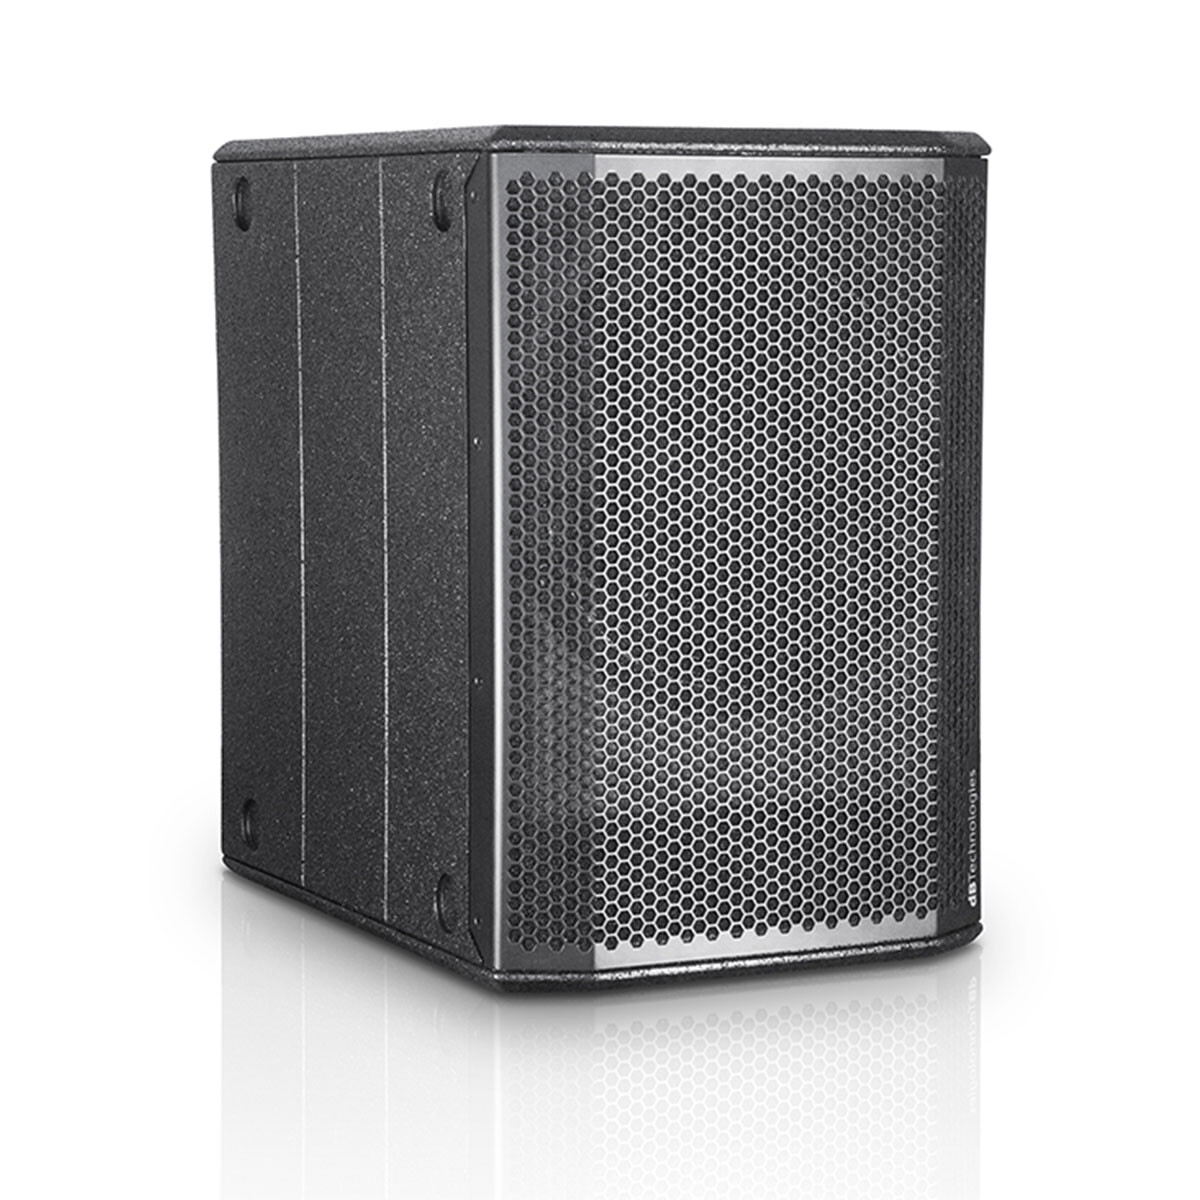 Subwoofer Activo Db 612 1x12¨ 600w Rms 129db 